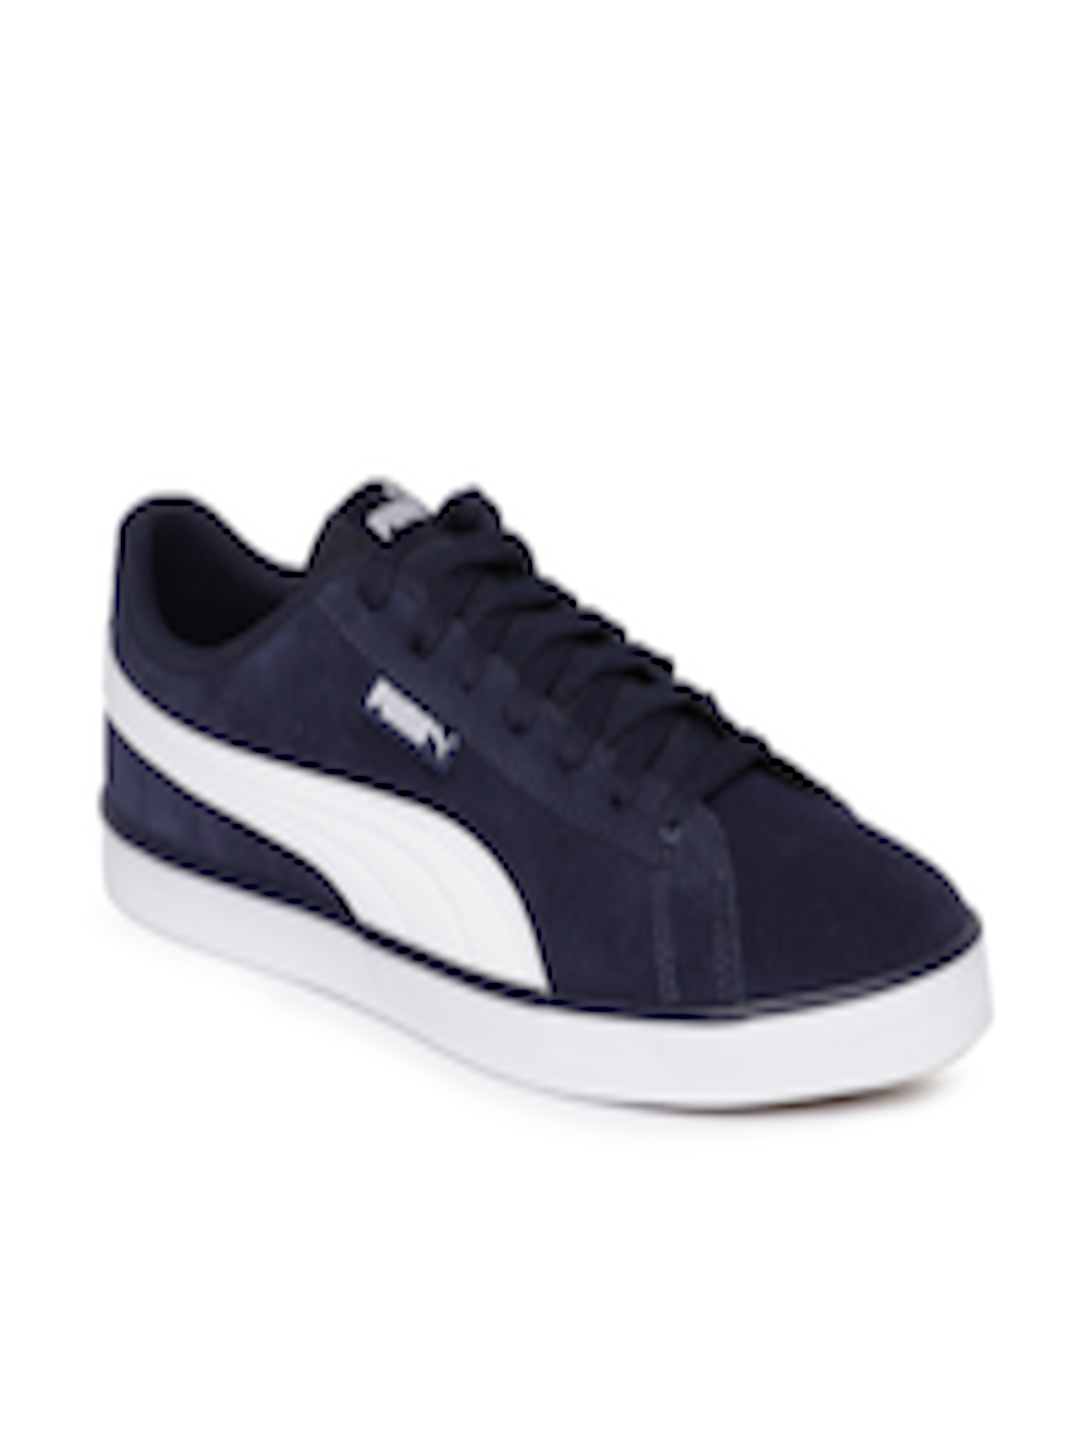 Buy Puma Men Navy Blue Sneakers - Casual Shoes for Men 8092073 | Myntra